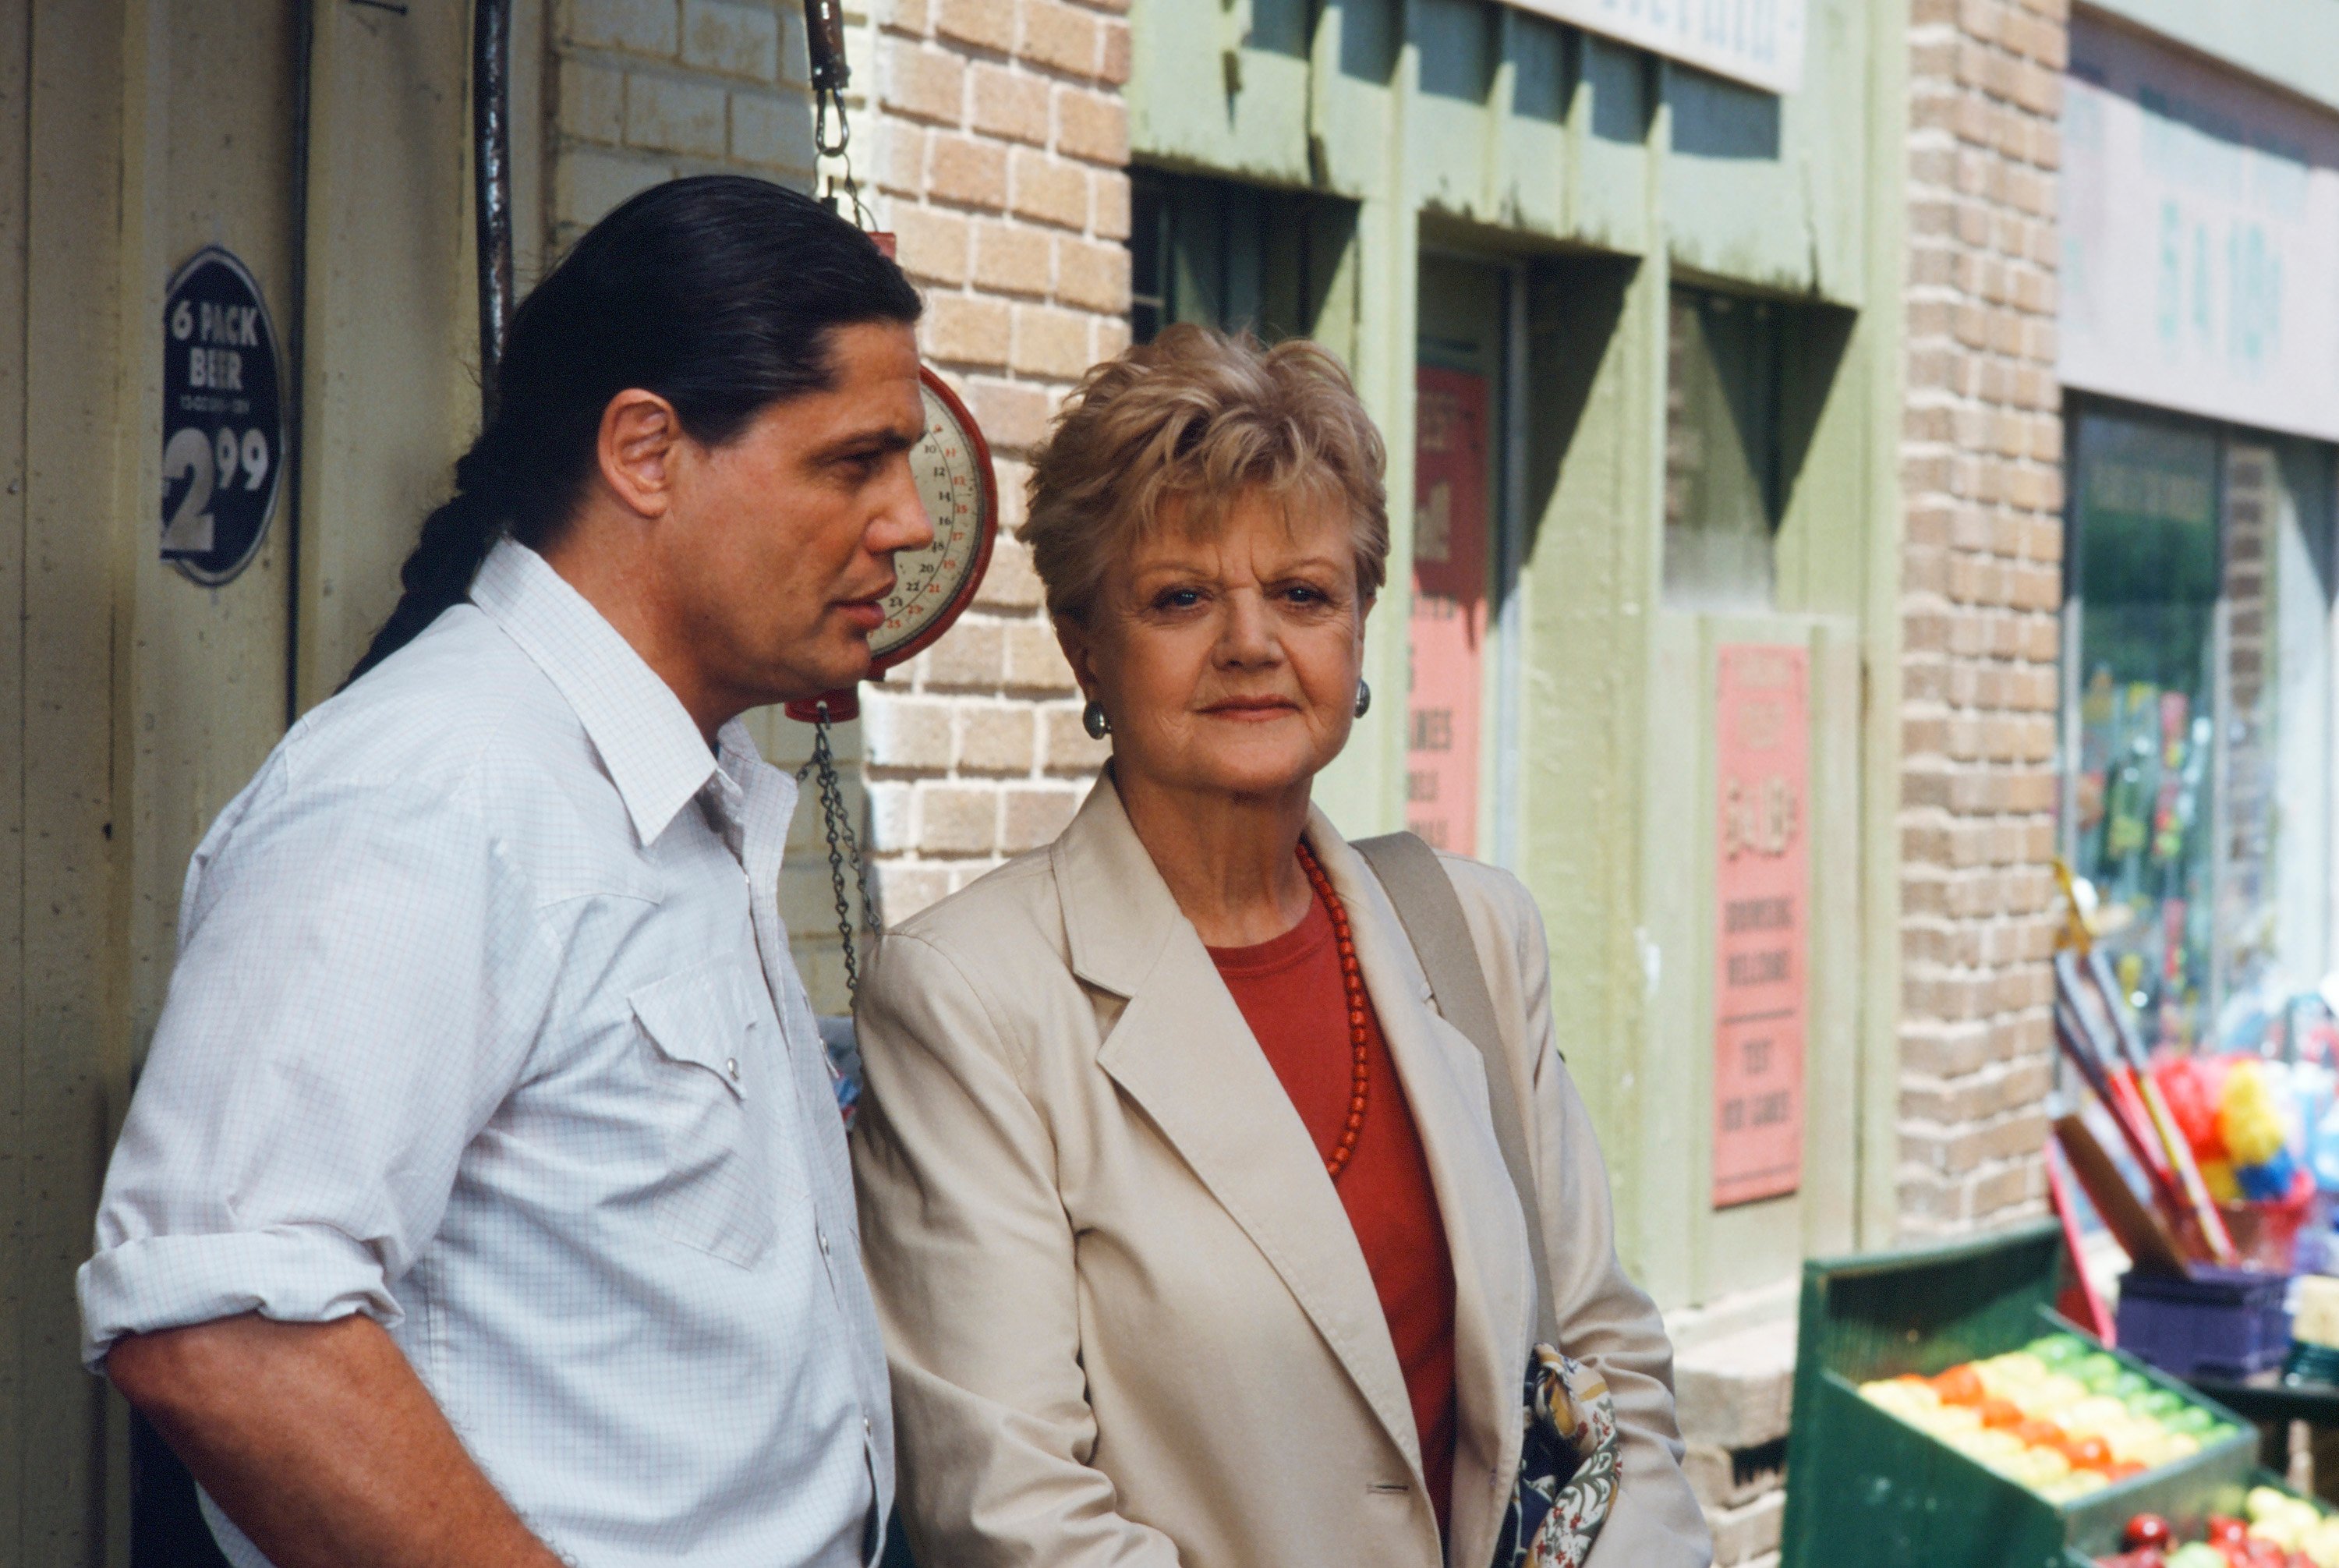 Jim Sunrise and Jessica Fletcher speak on the street in the made-for-TV movie, 'Murder, She Wrote: South by Southwest' 